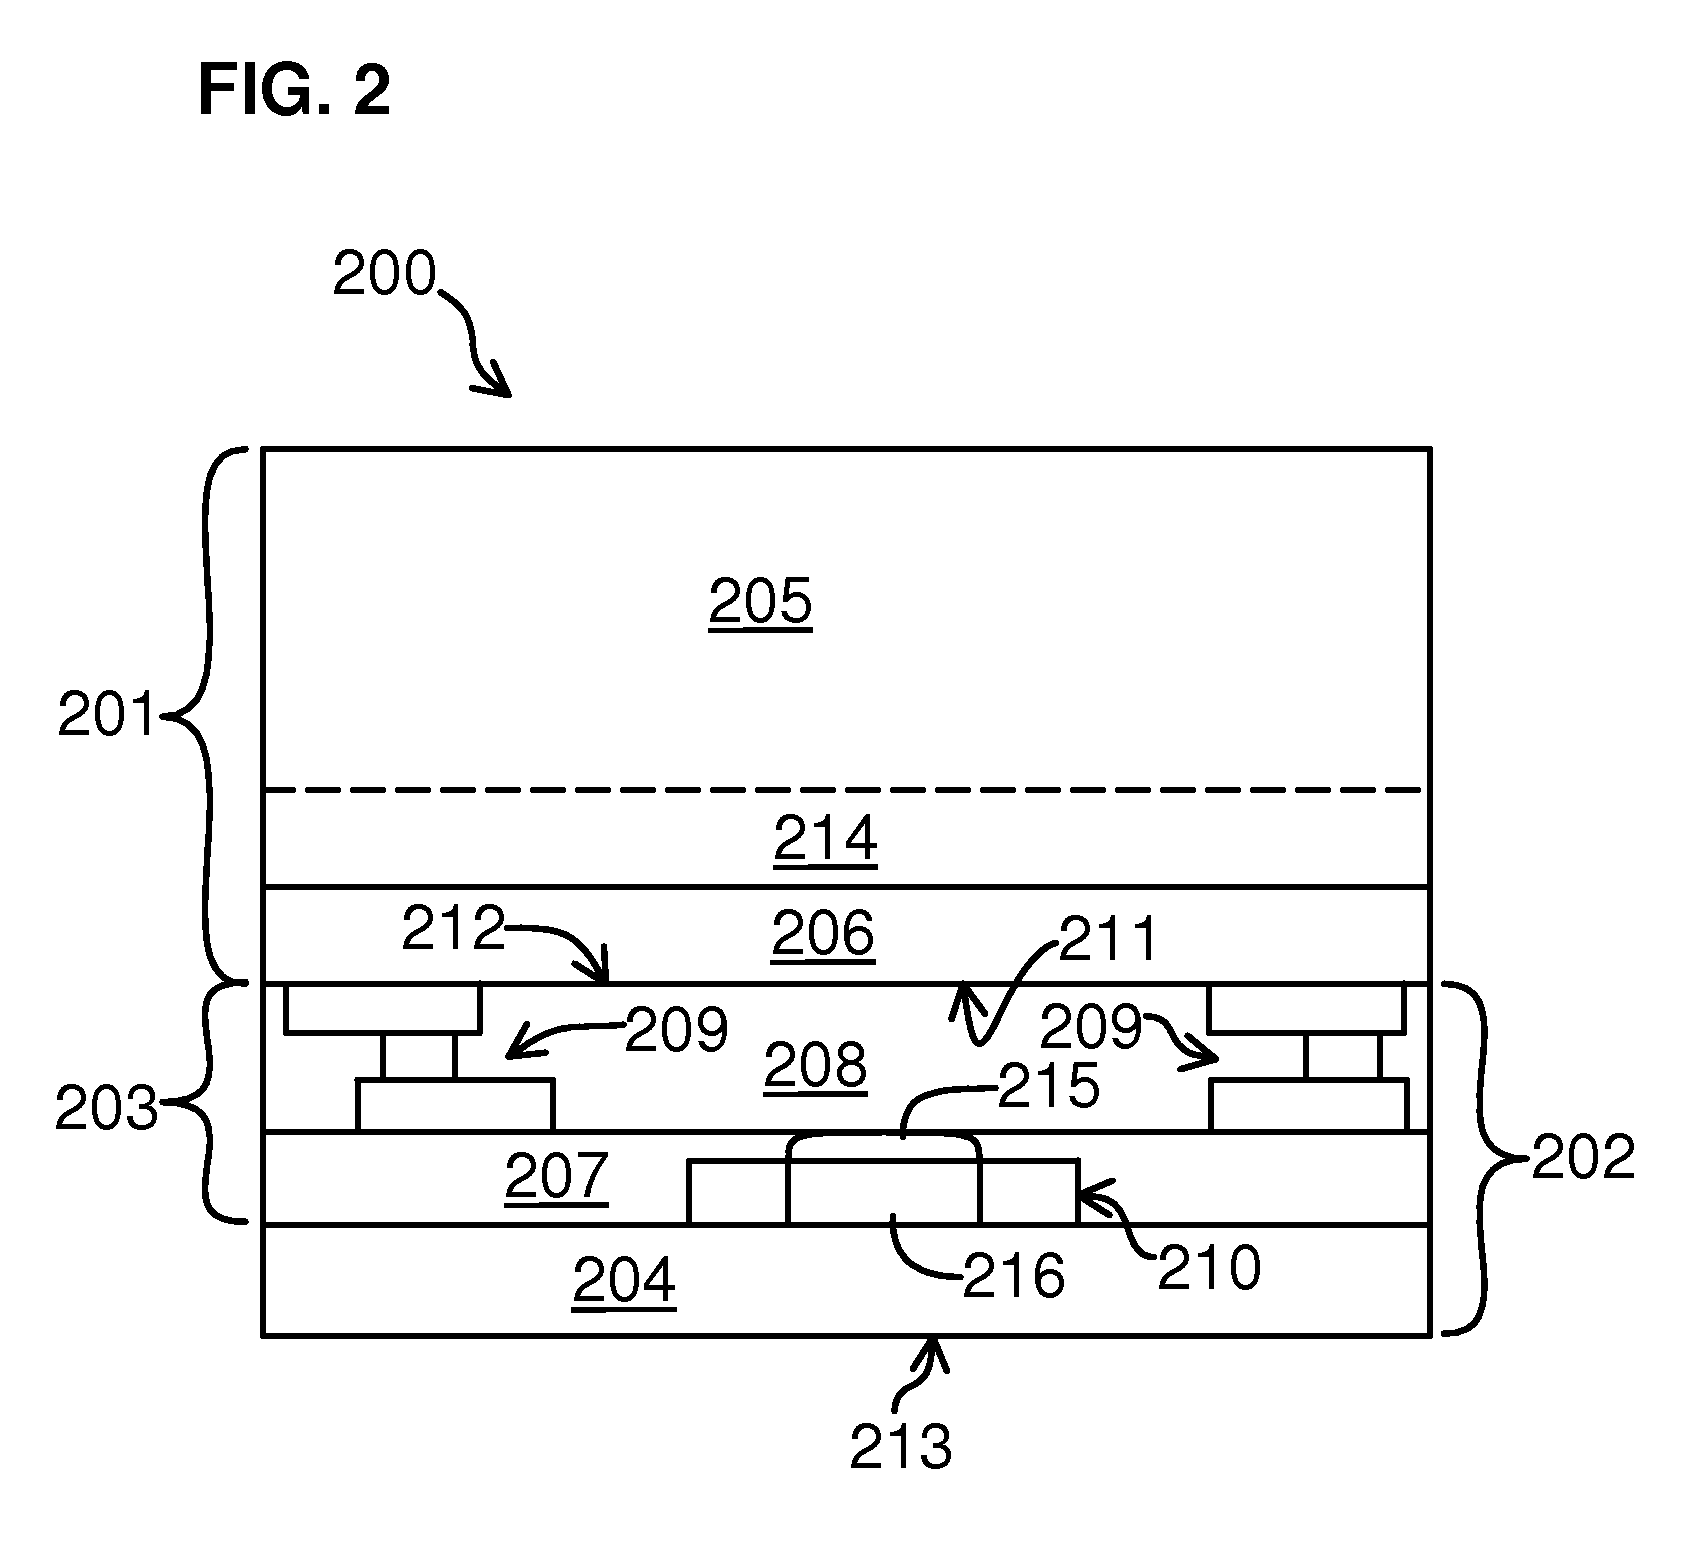 Trap rich layer for semiconductor devices